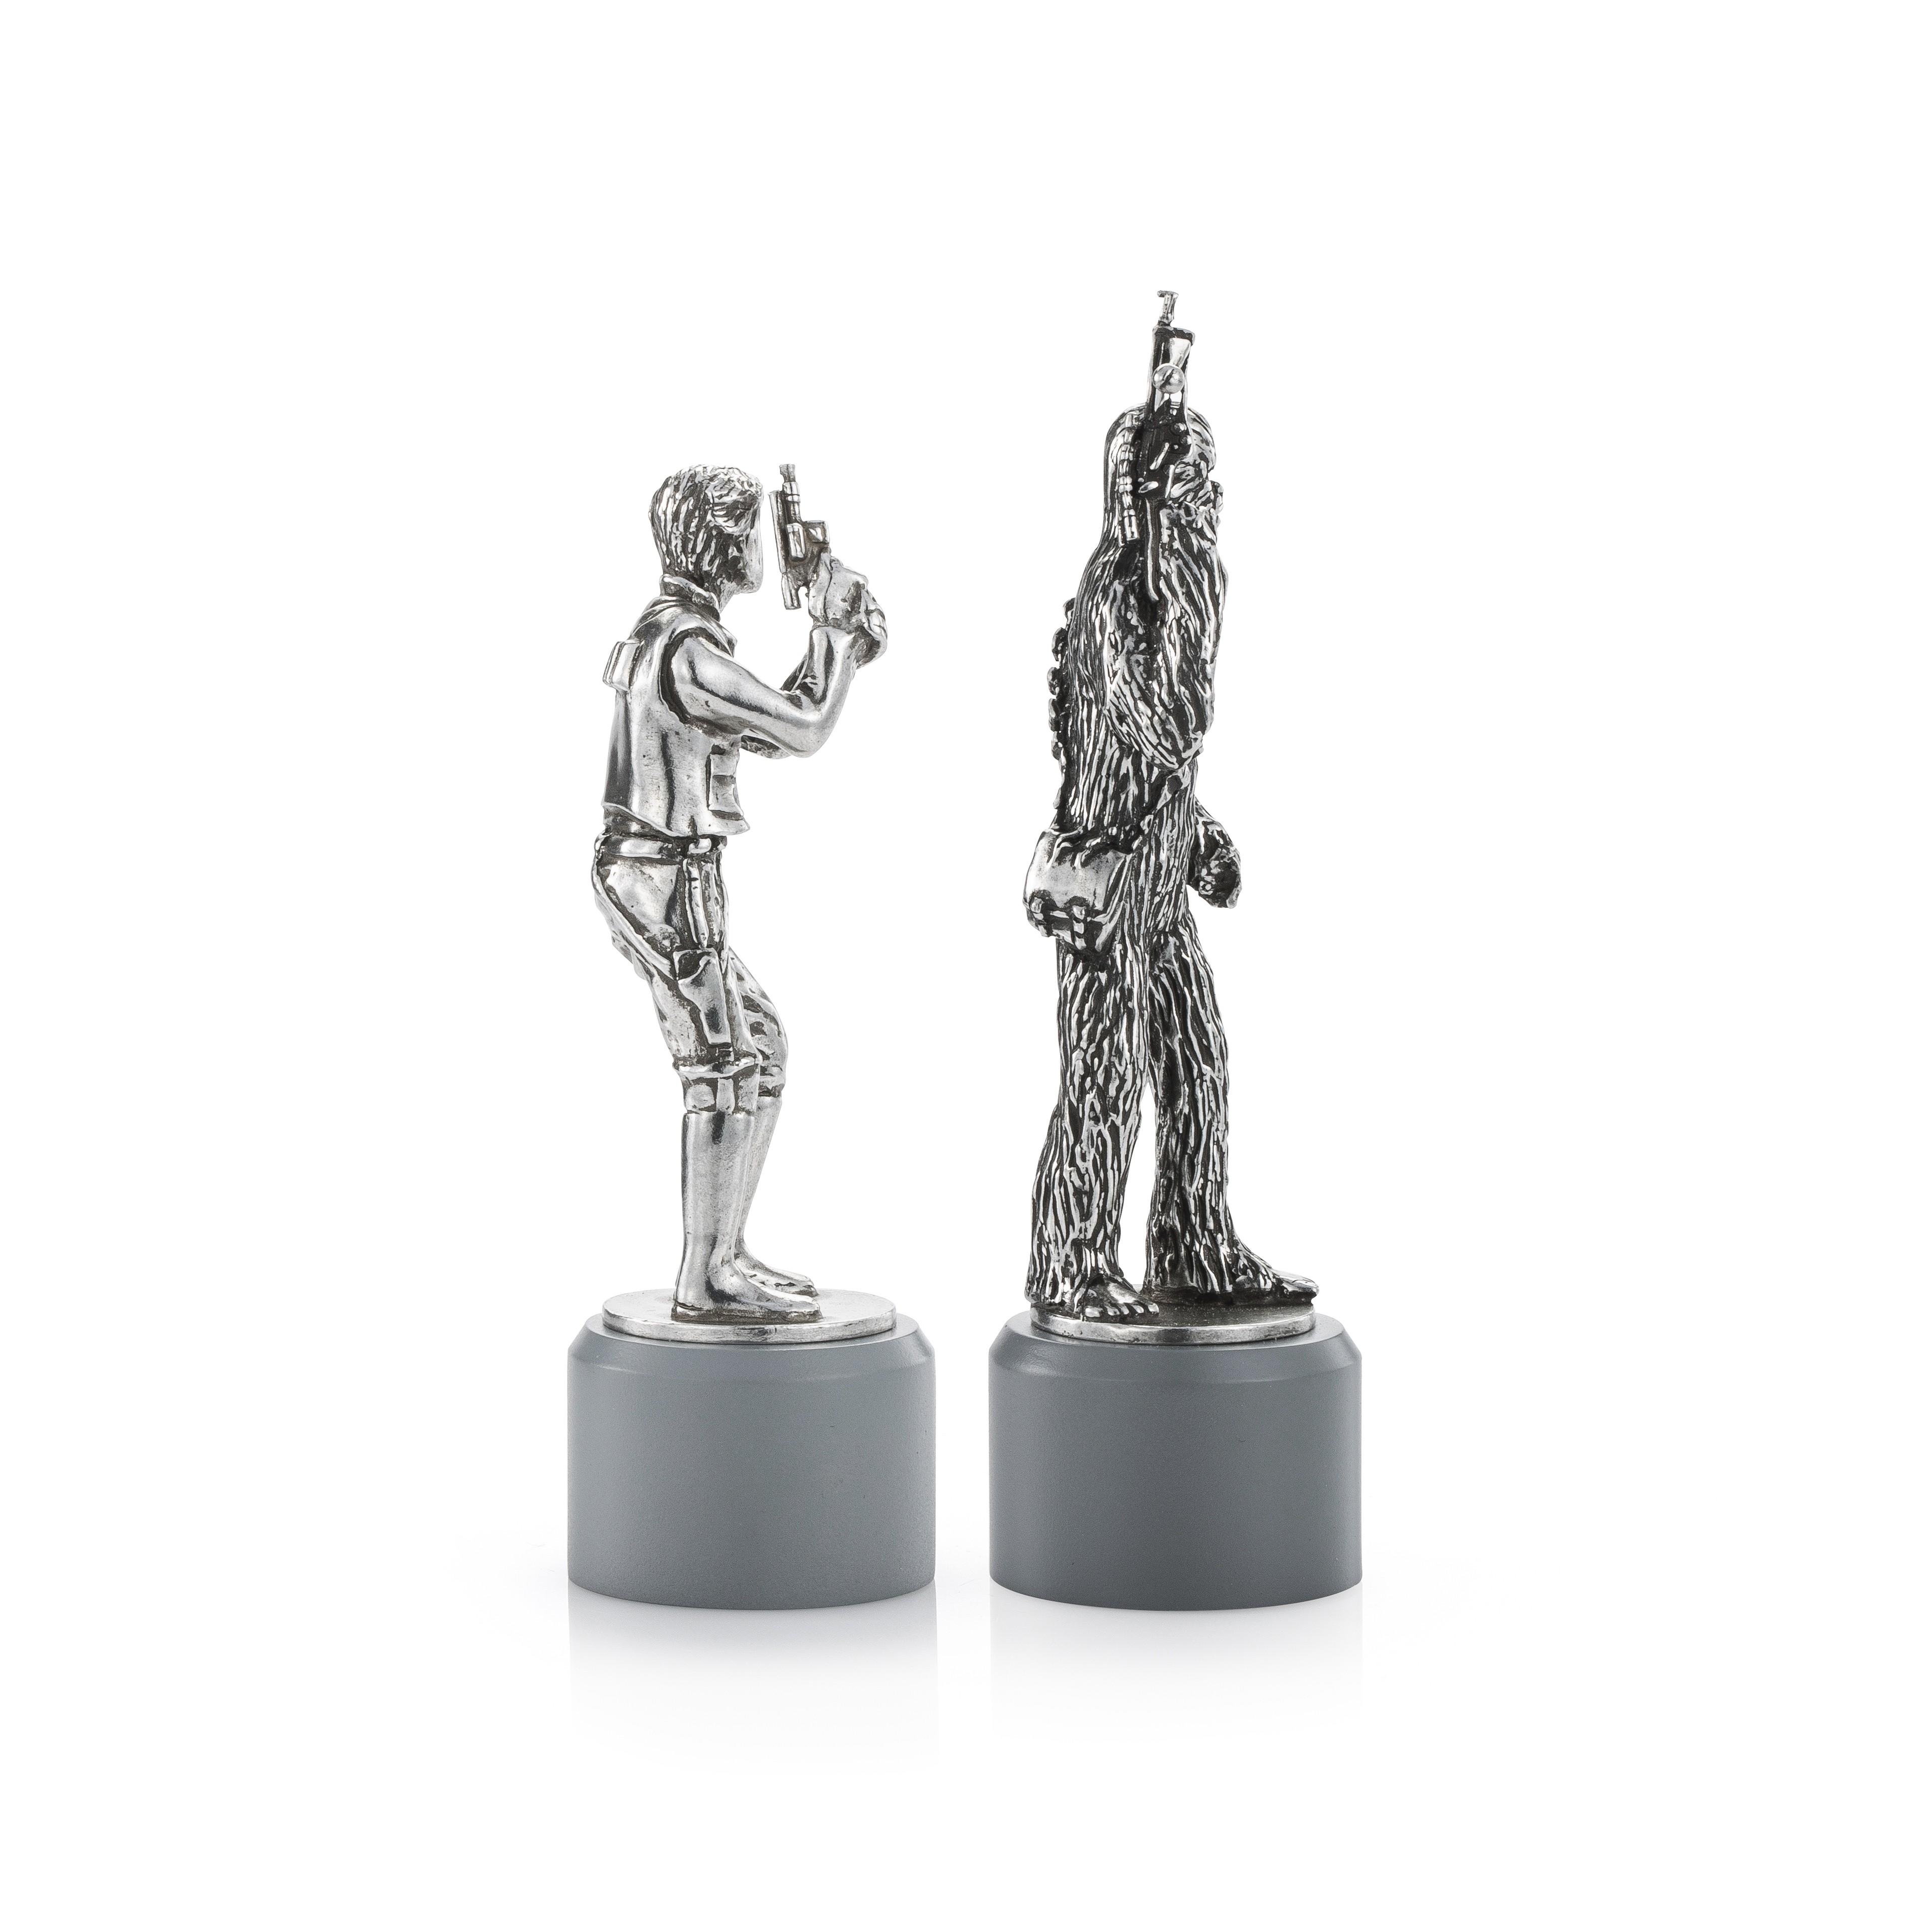 Han Solo & Chewbacca Bishop Chess Piece Pair